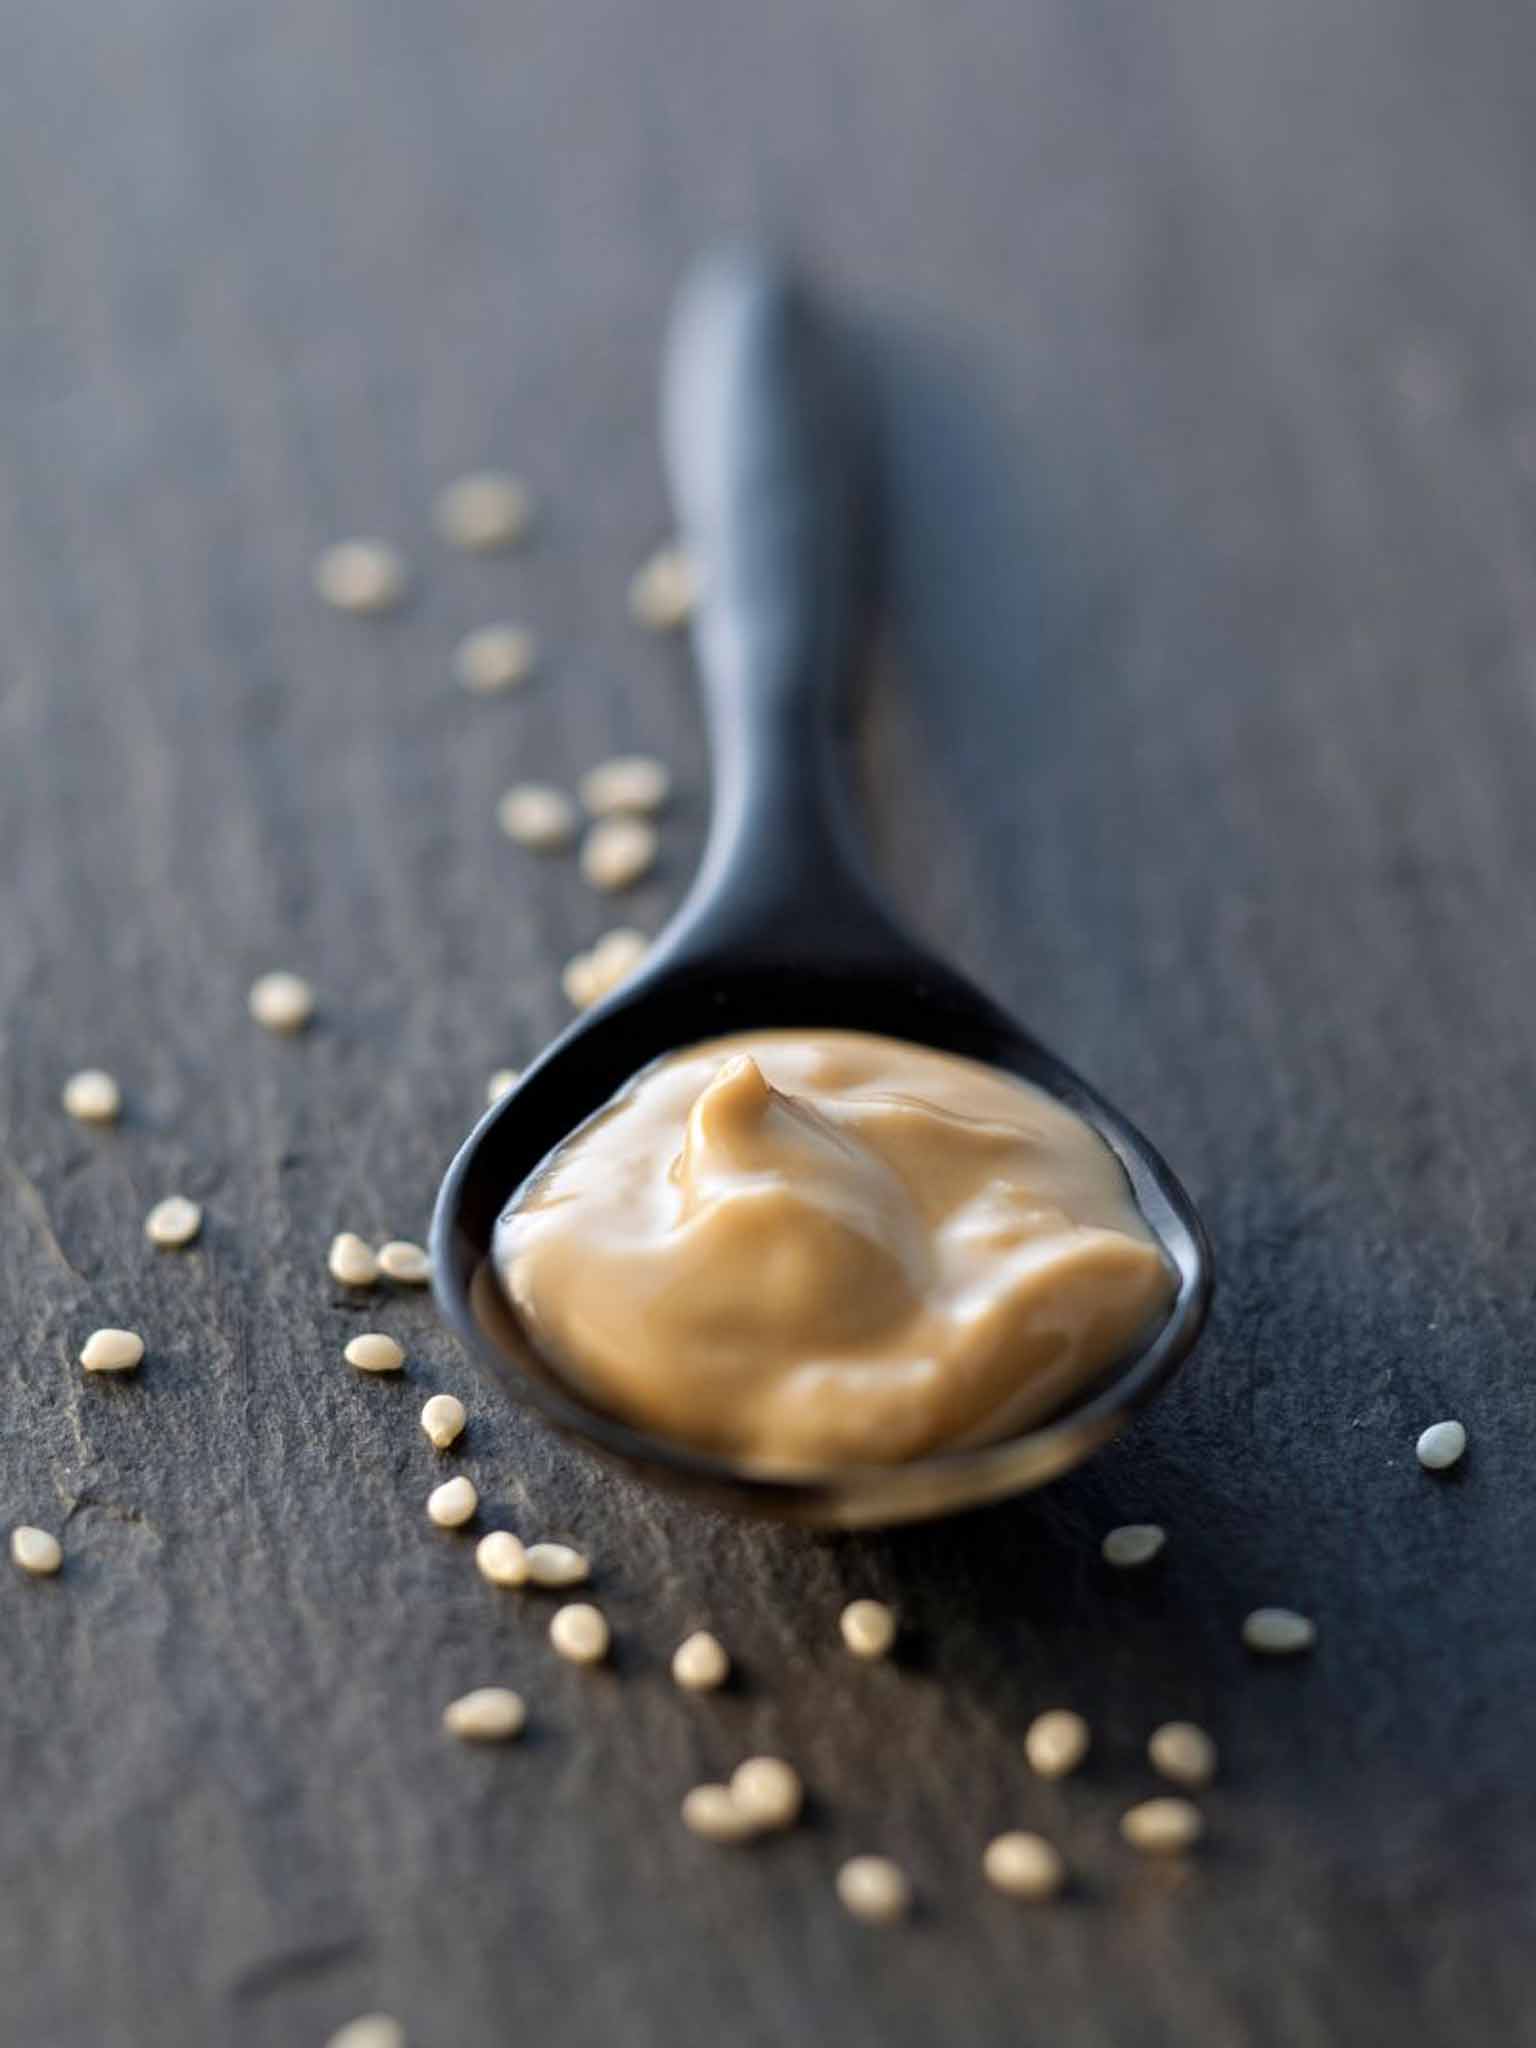 Tahini in its natural form